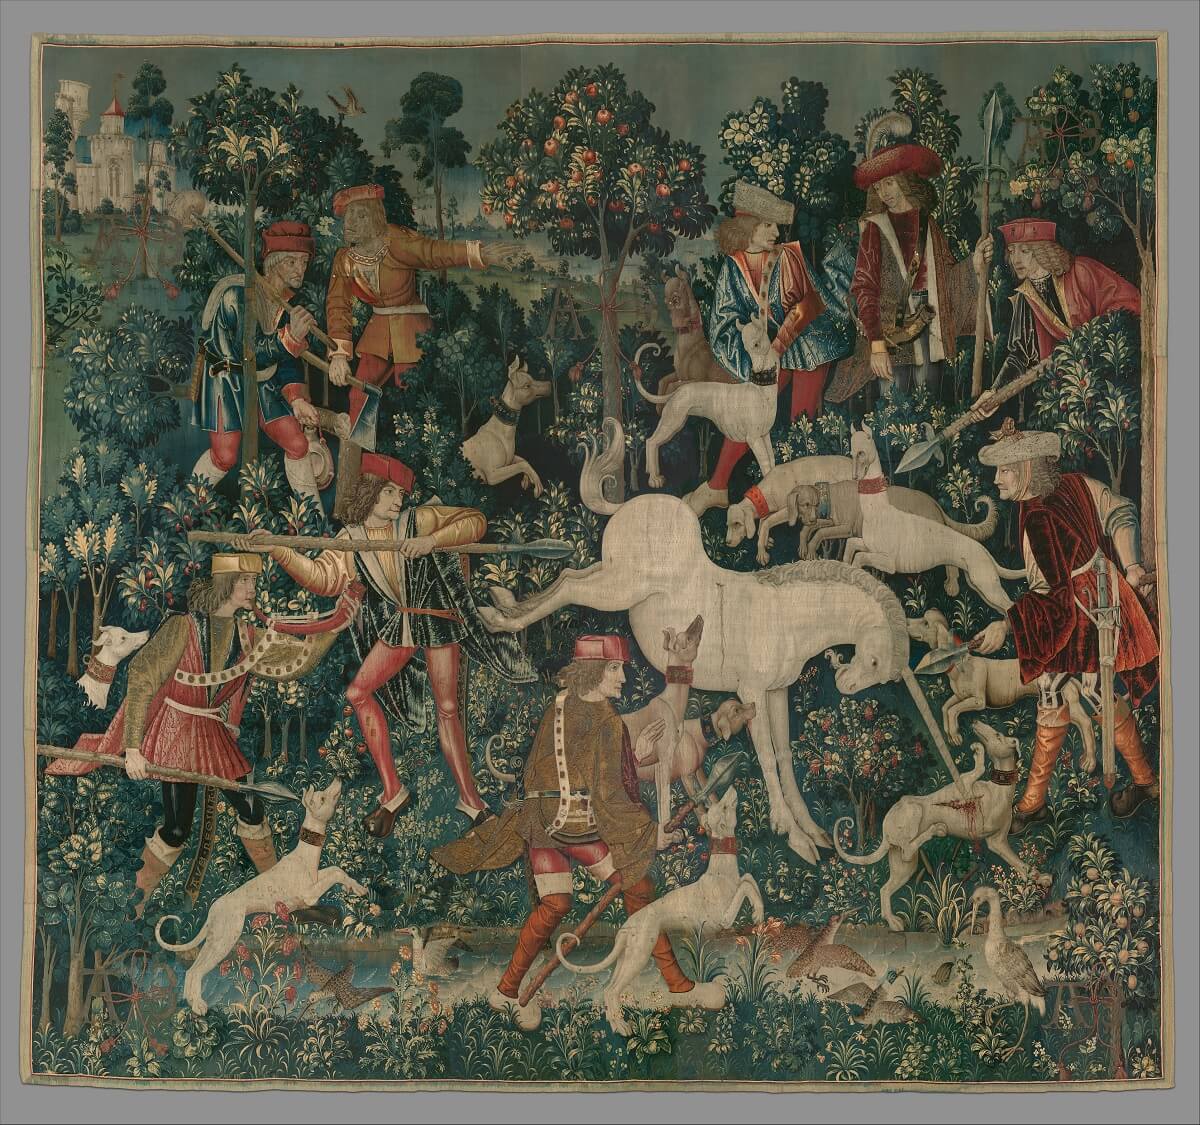 The Unicorn Defends Himself, from the Unicorn Tapestries (1495-1505) 